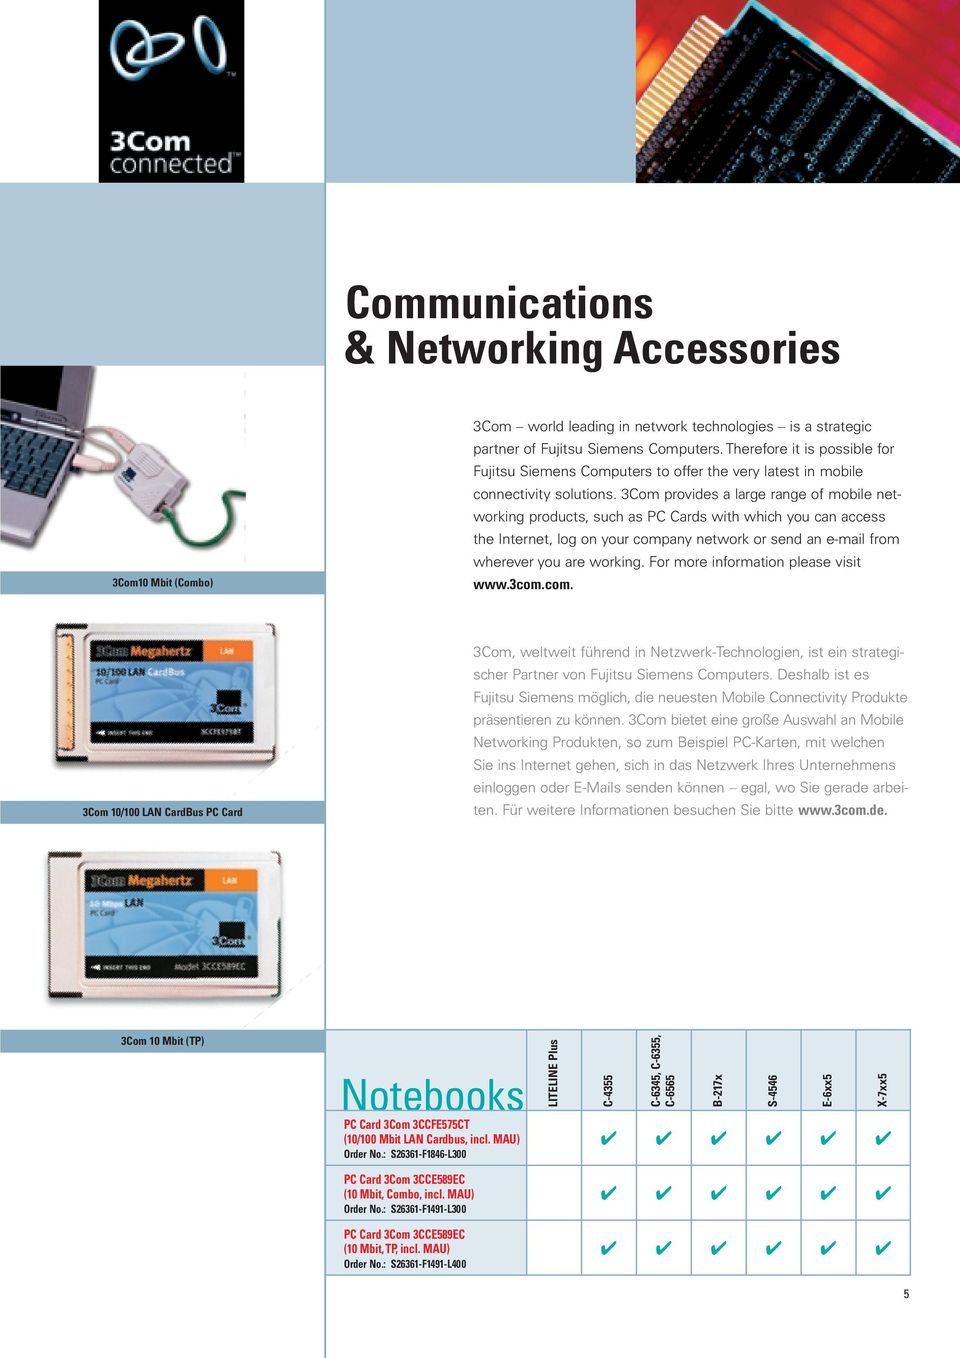 3Com provides a large range of mobile networking products, such as PC Cards with which you can access the Internet, log on your company network or send an e-mail from wherever you are working.